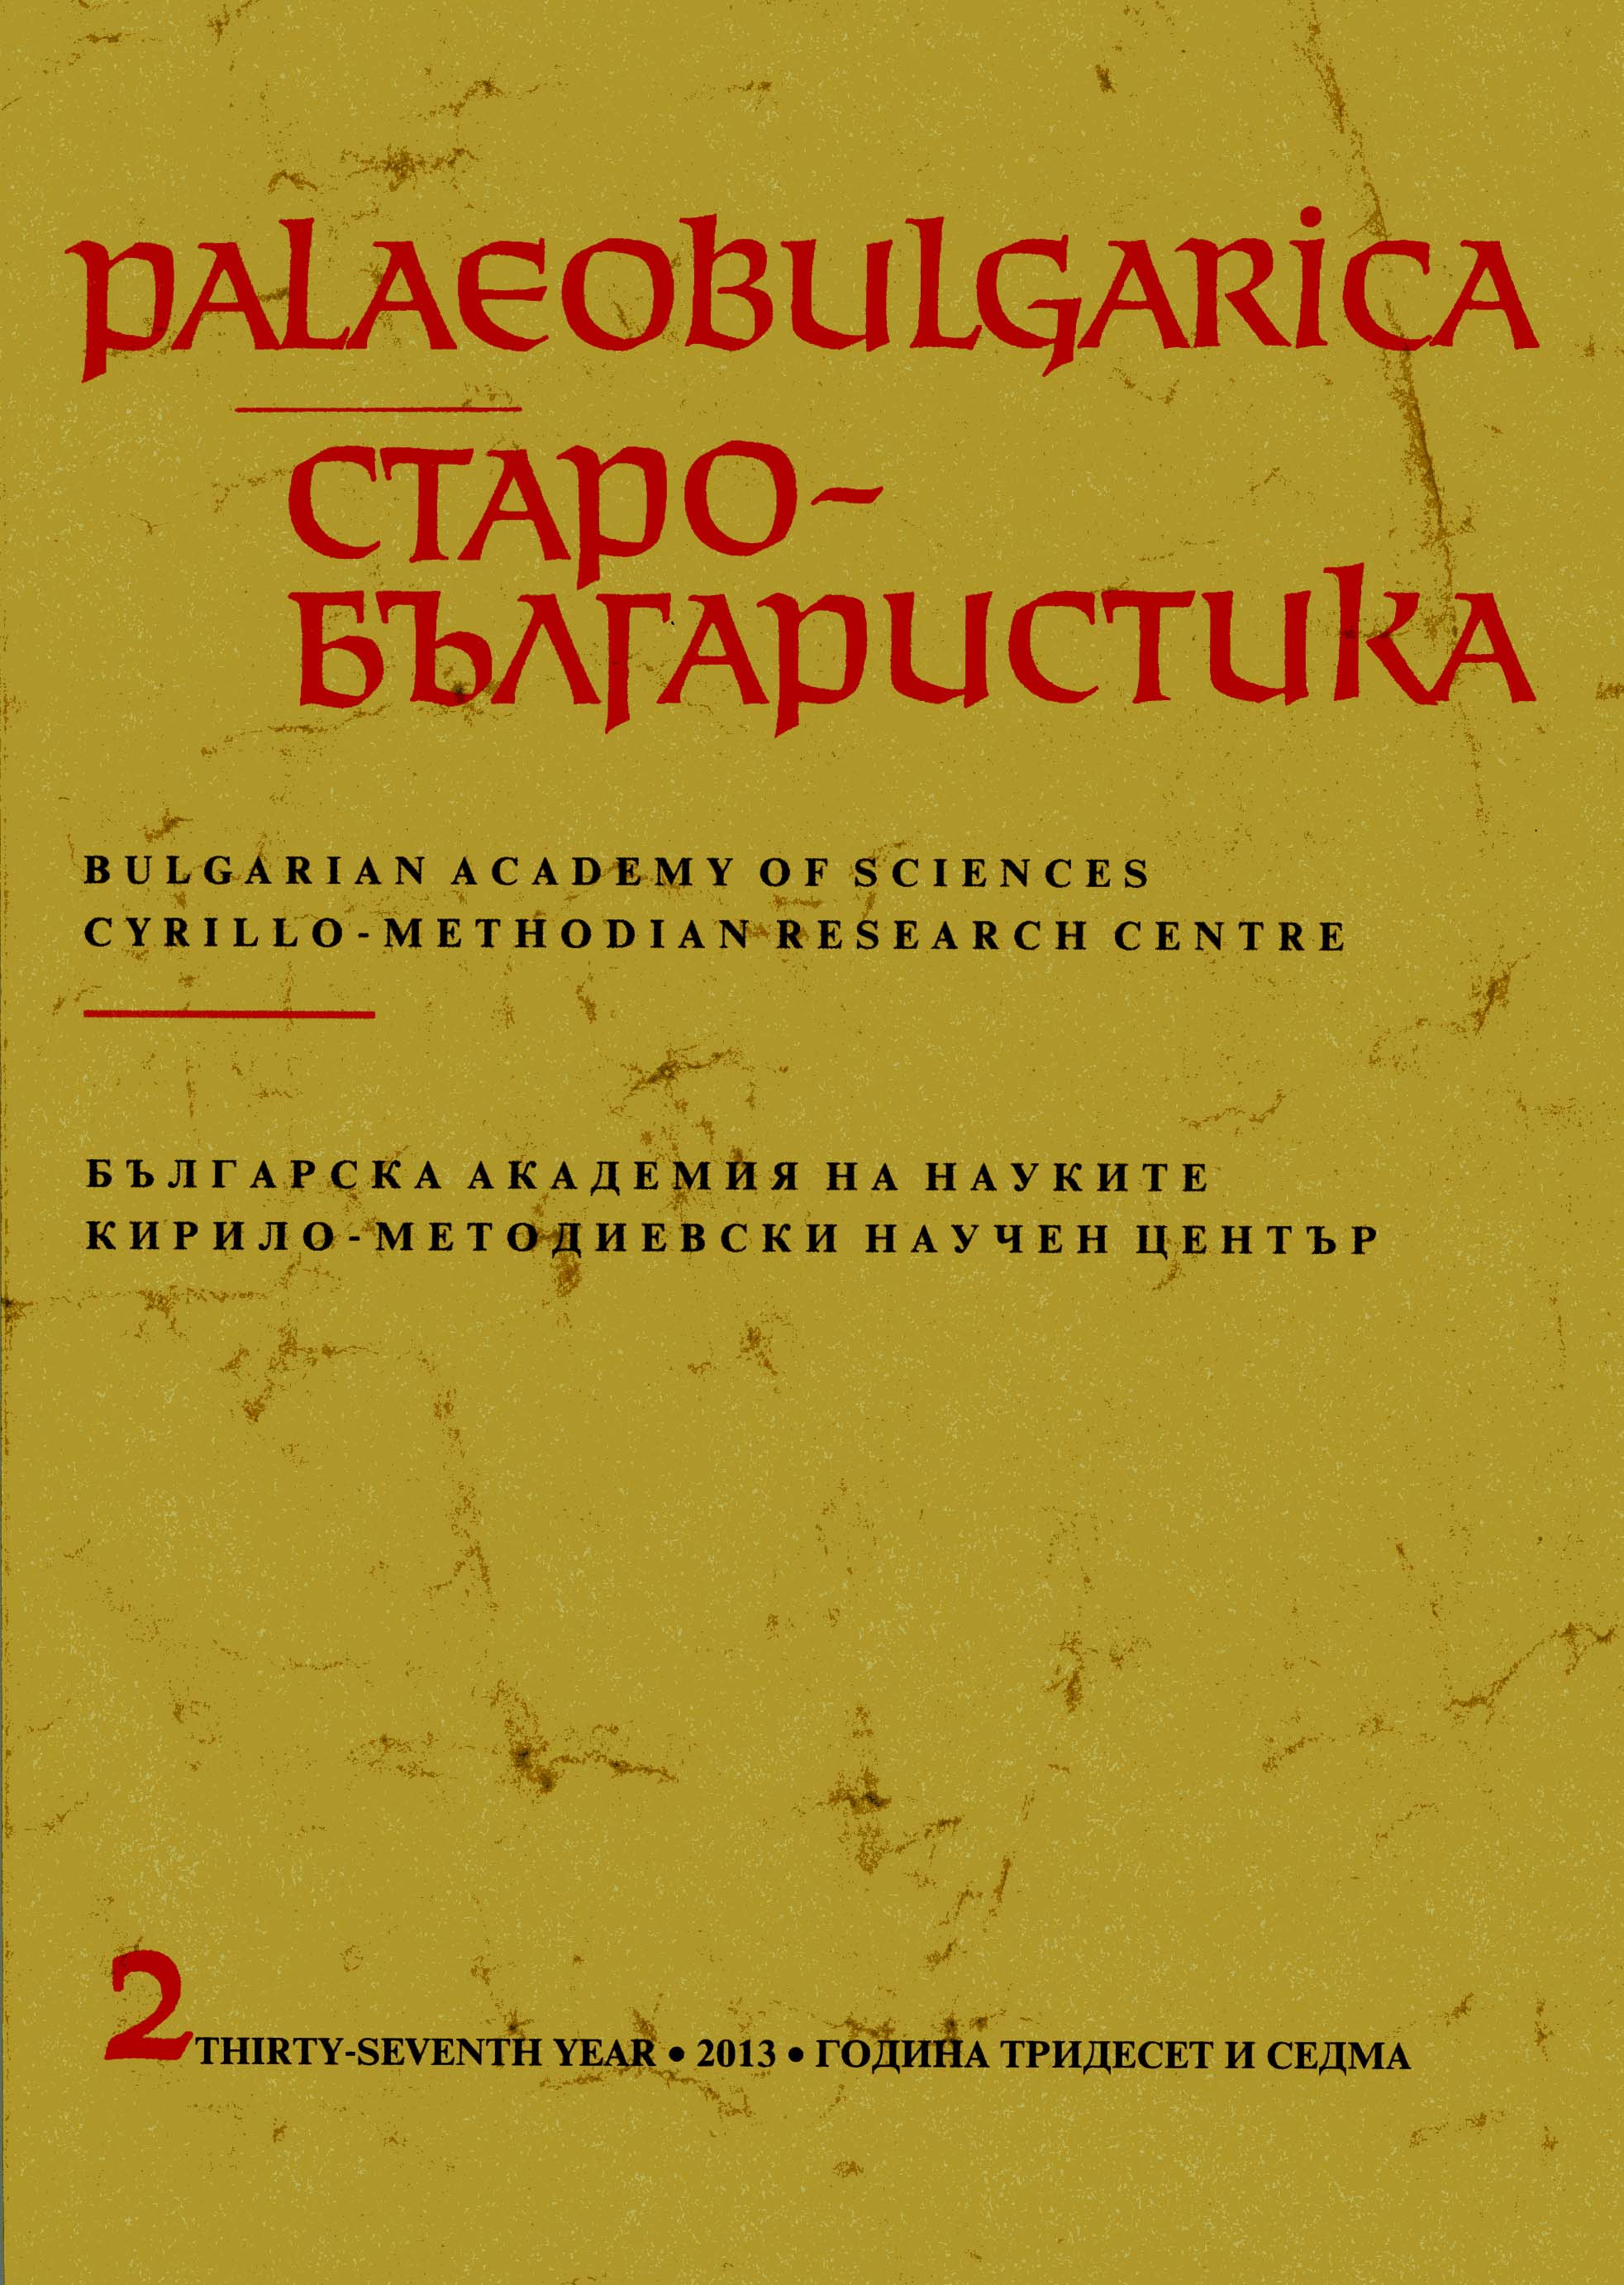 Polichroniy Syrkou and Bulgarian Cultural Heritage: a Documentary Account Cover Image